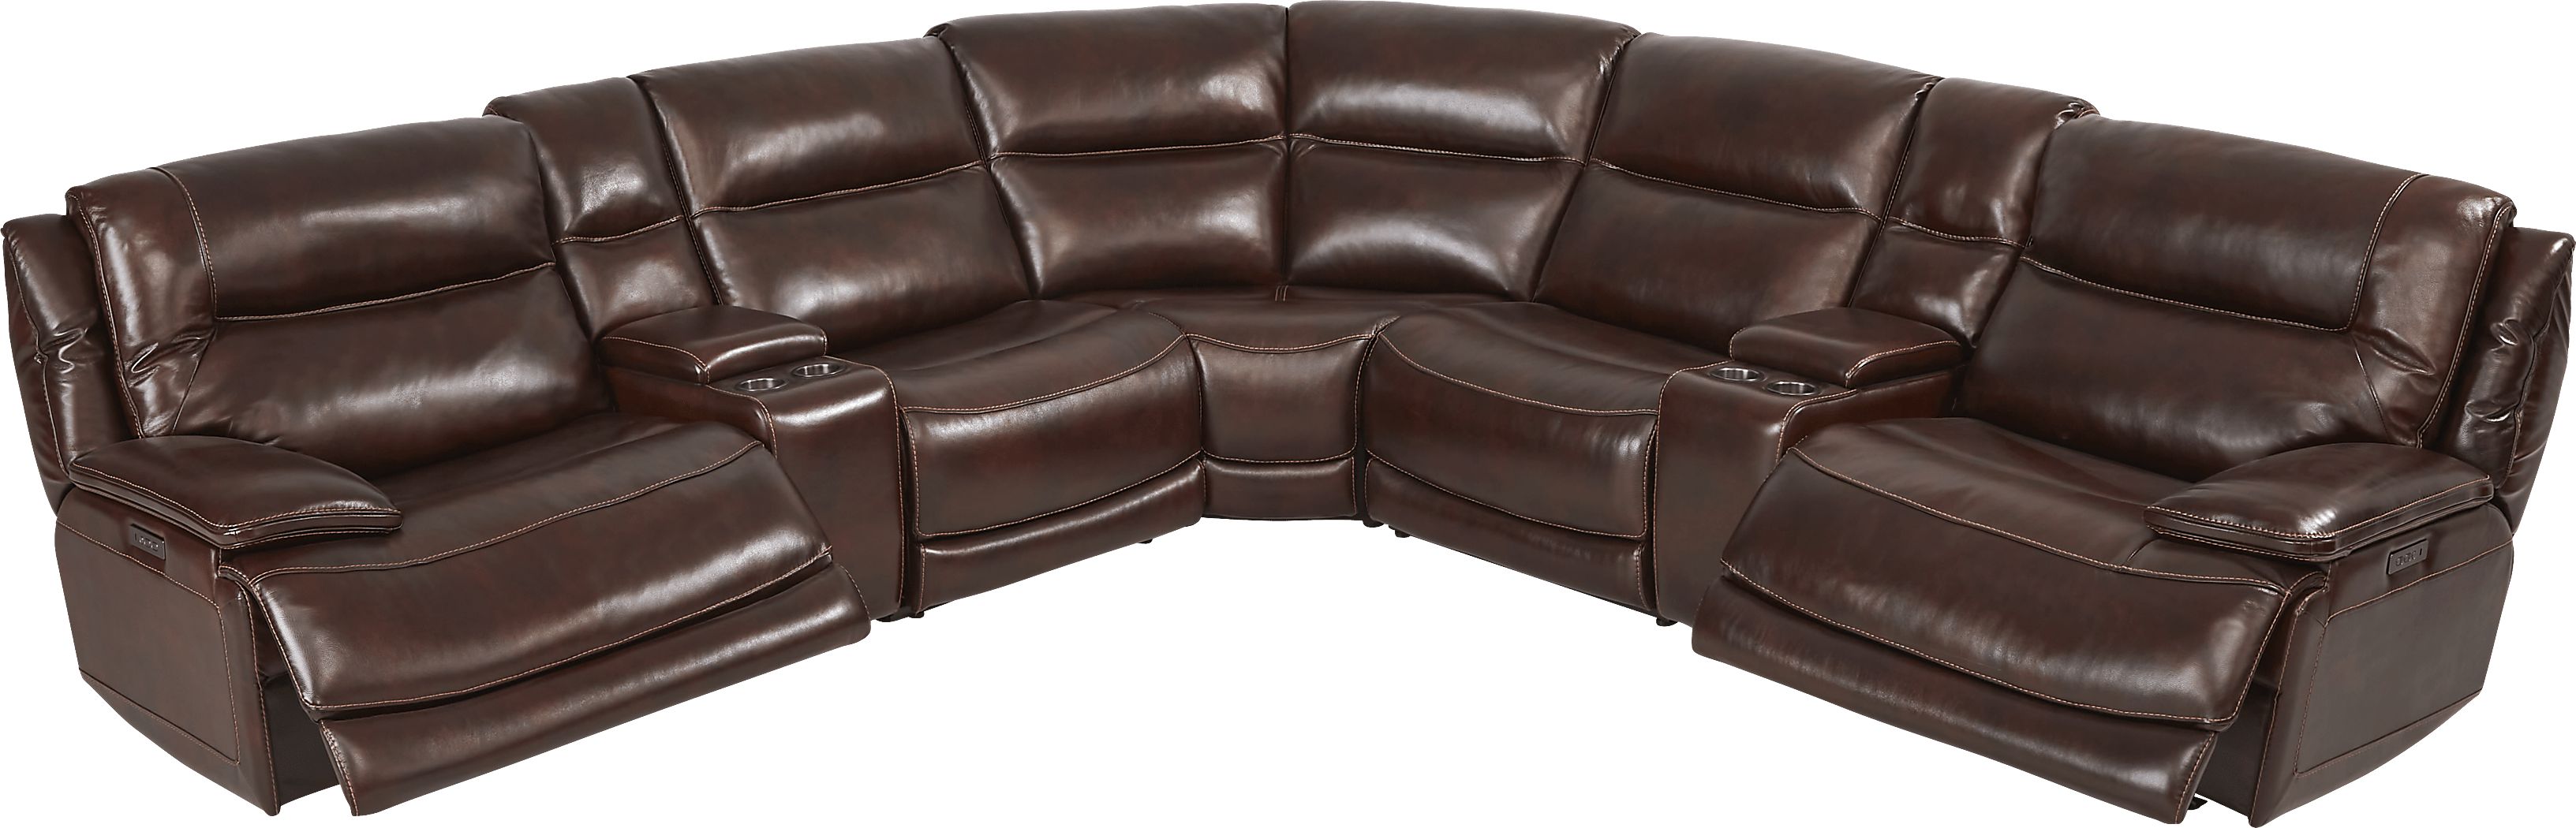 Palladino Brown Leather 7 Pc Dual Power Reclining Sectional